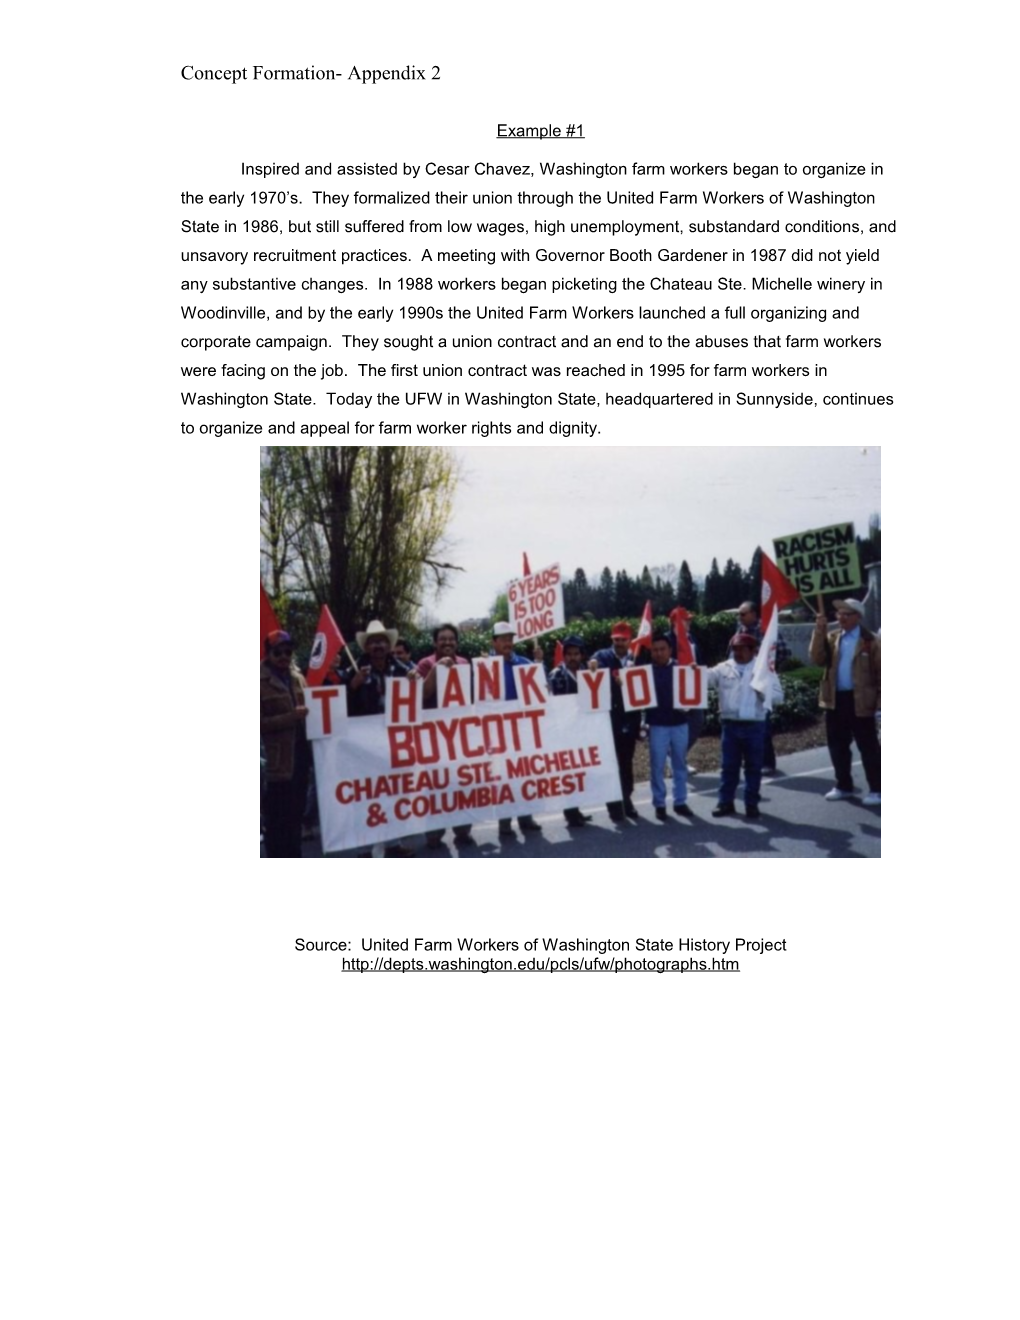 Source: United Farm Workers of Washington State History Project